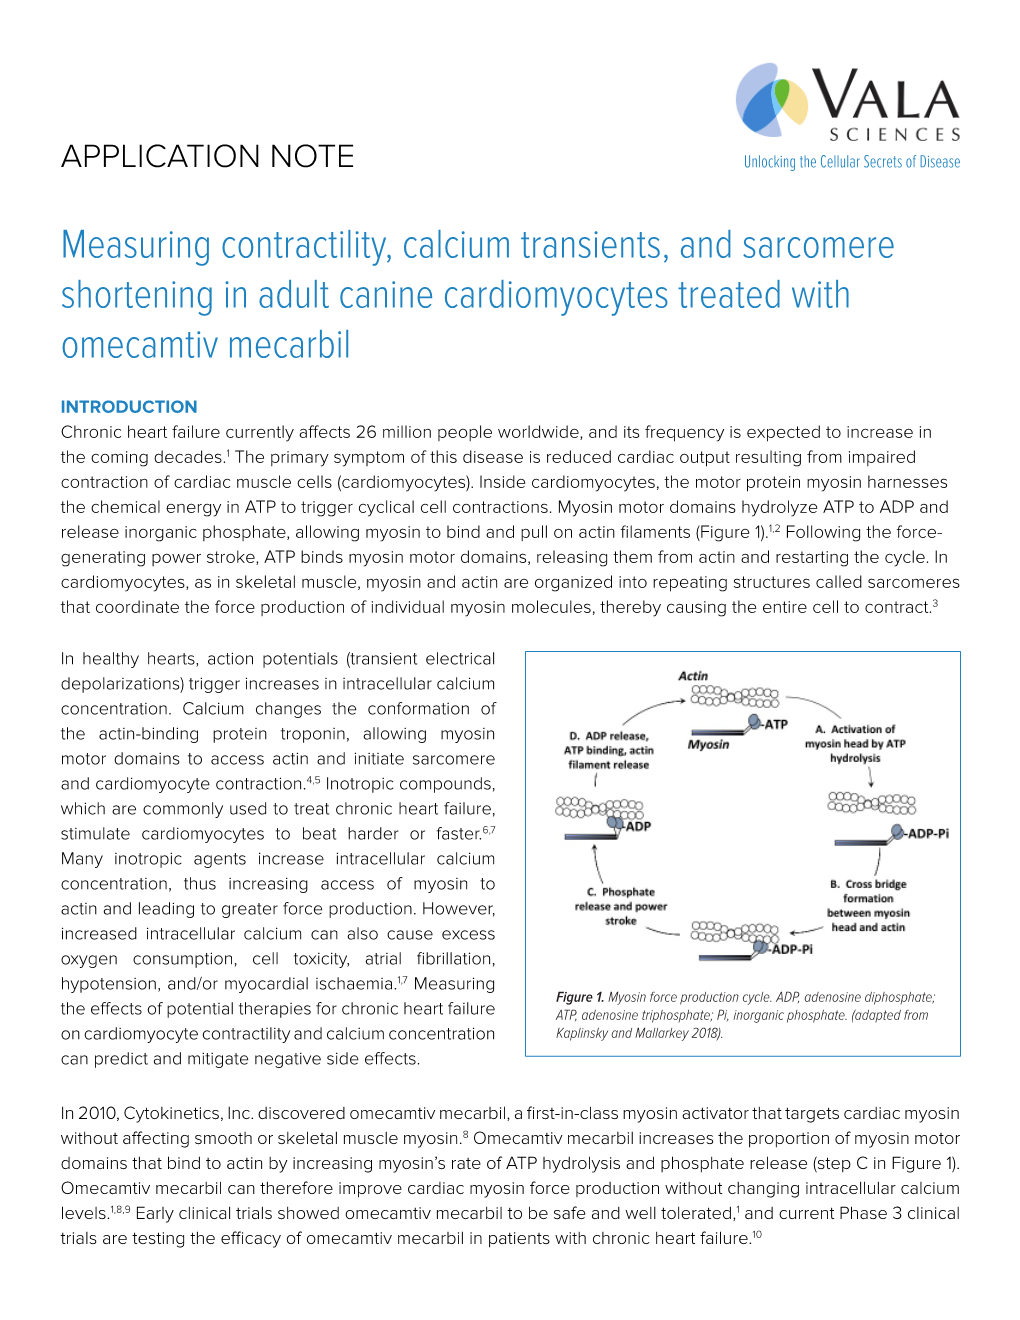 Measuring Contractility, Calcium Transients, and Sarcomere Shortening in Adult Canine Cardiomyocytes Treated with Omecamtiv Mecarbil